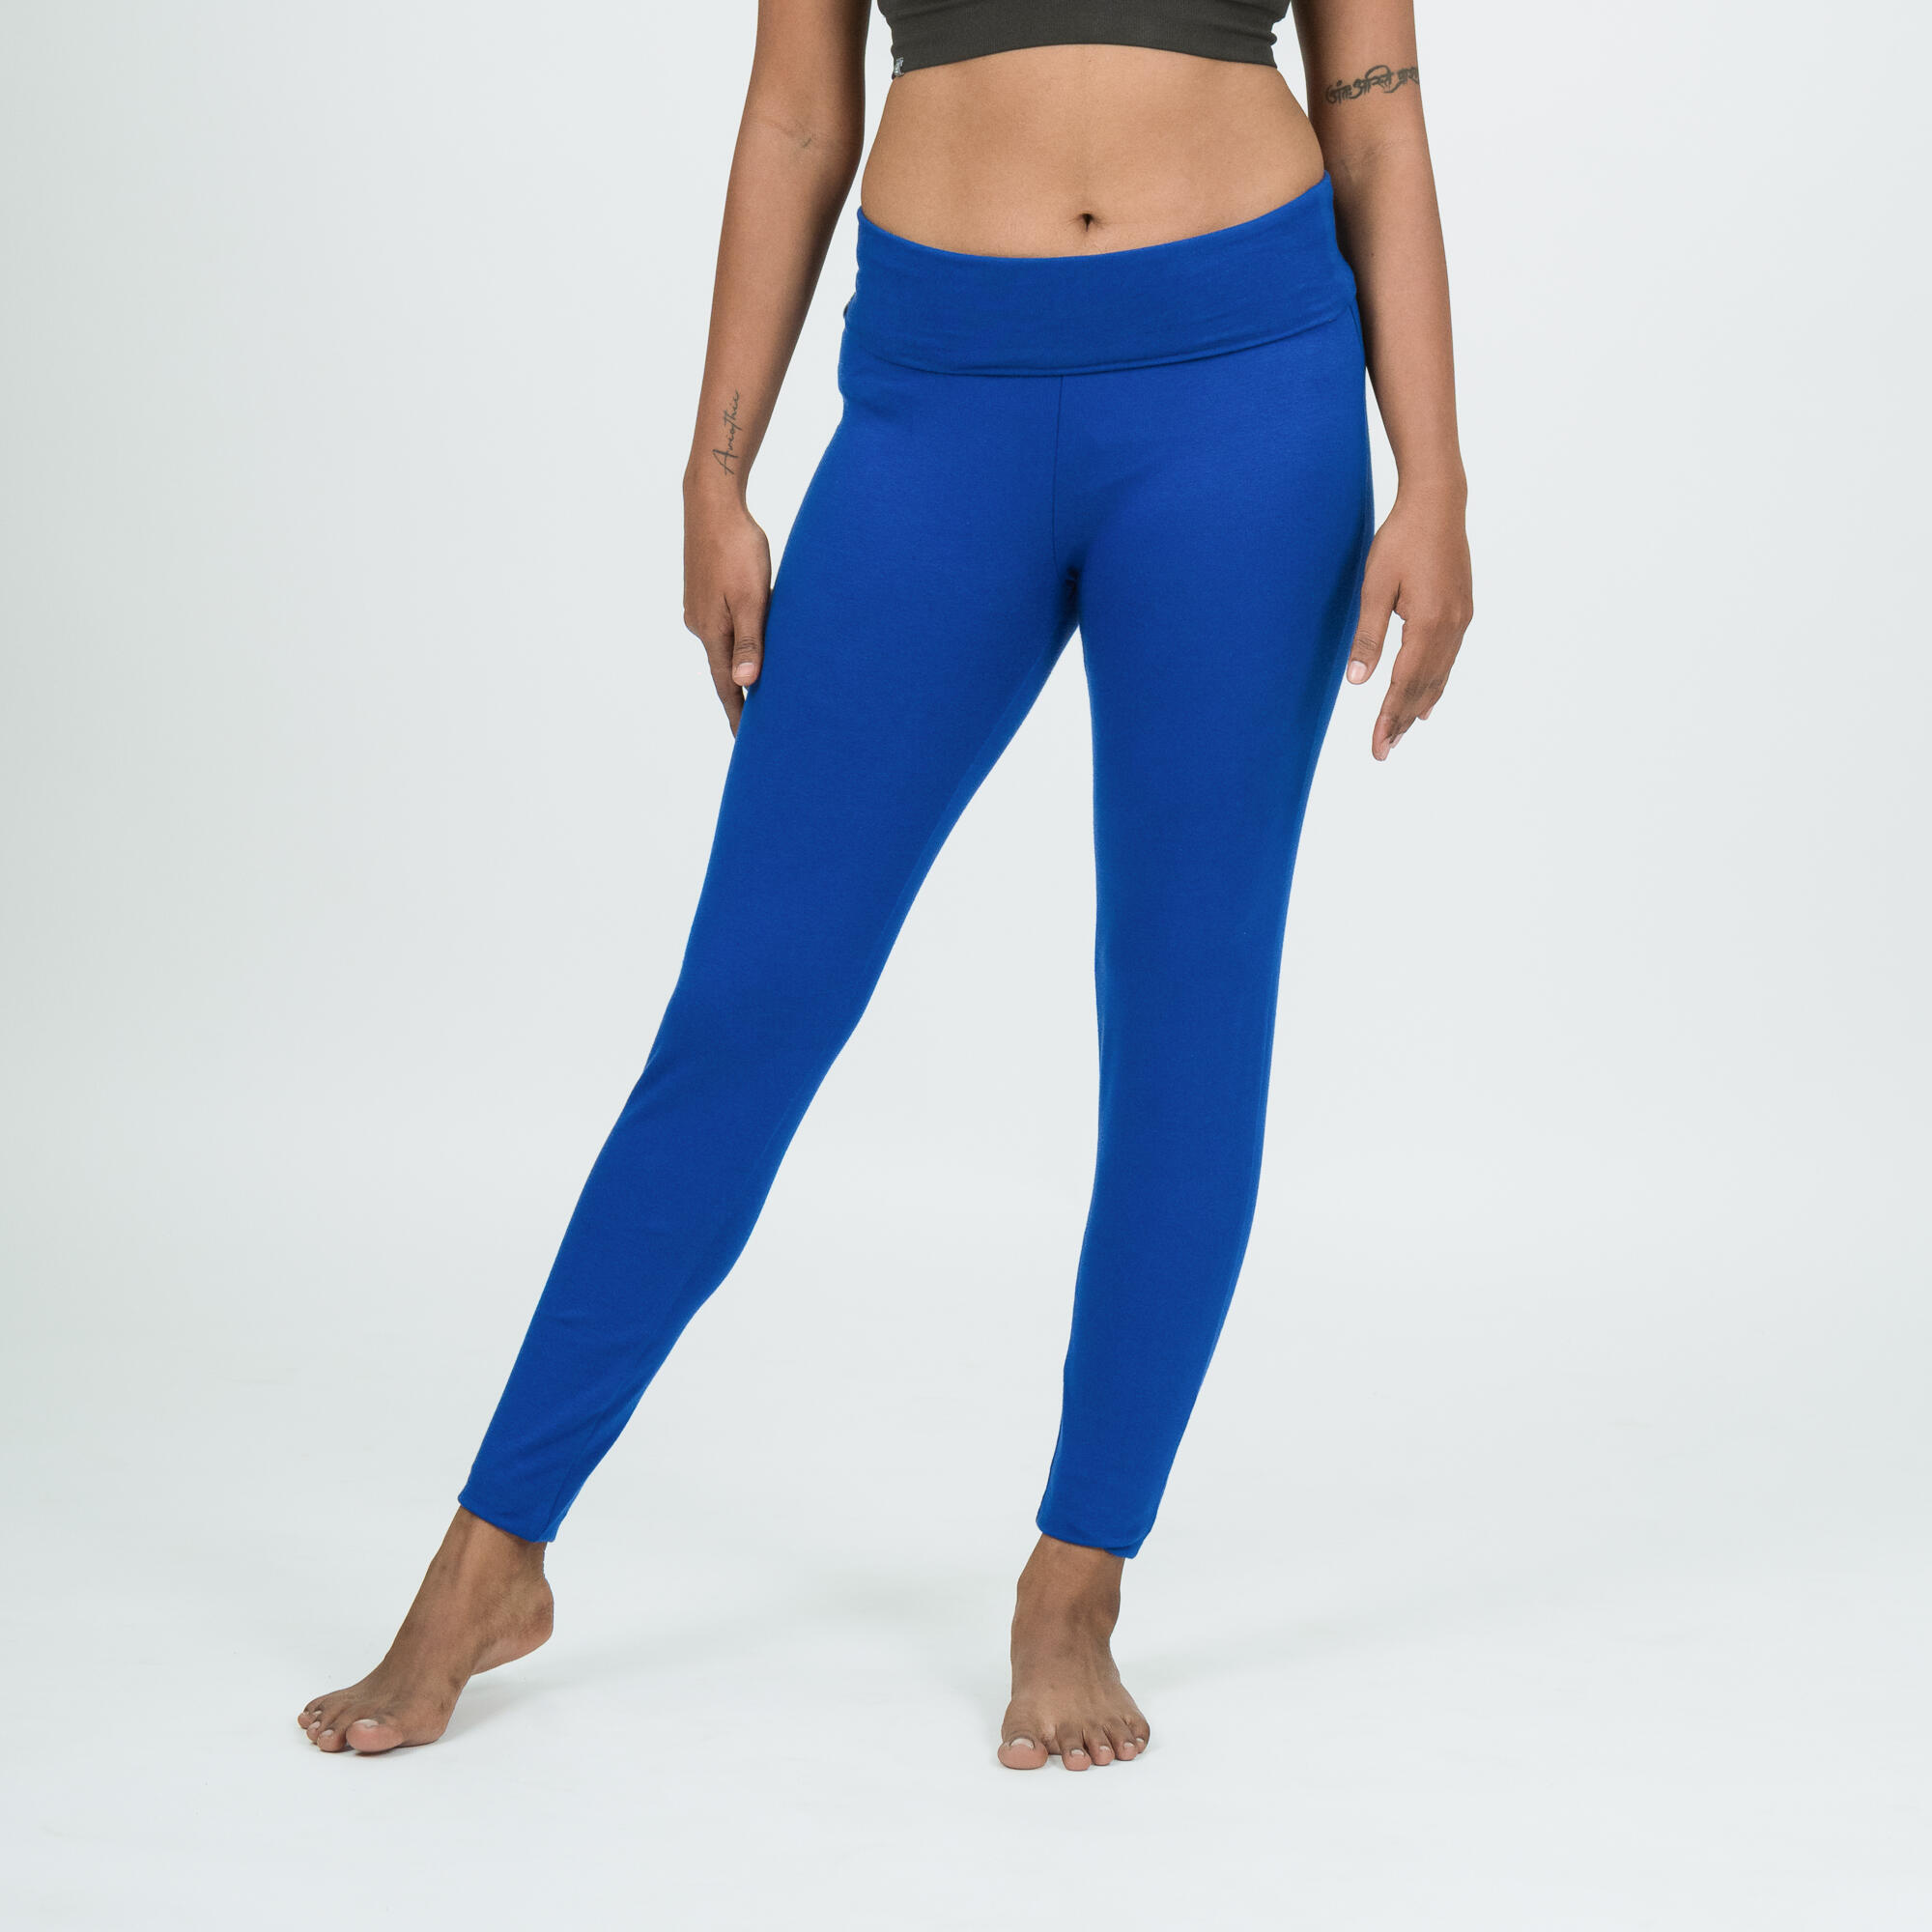 Up To 57% Off on Women's Comfy Cotton Leggings... | Groupon Goods